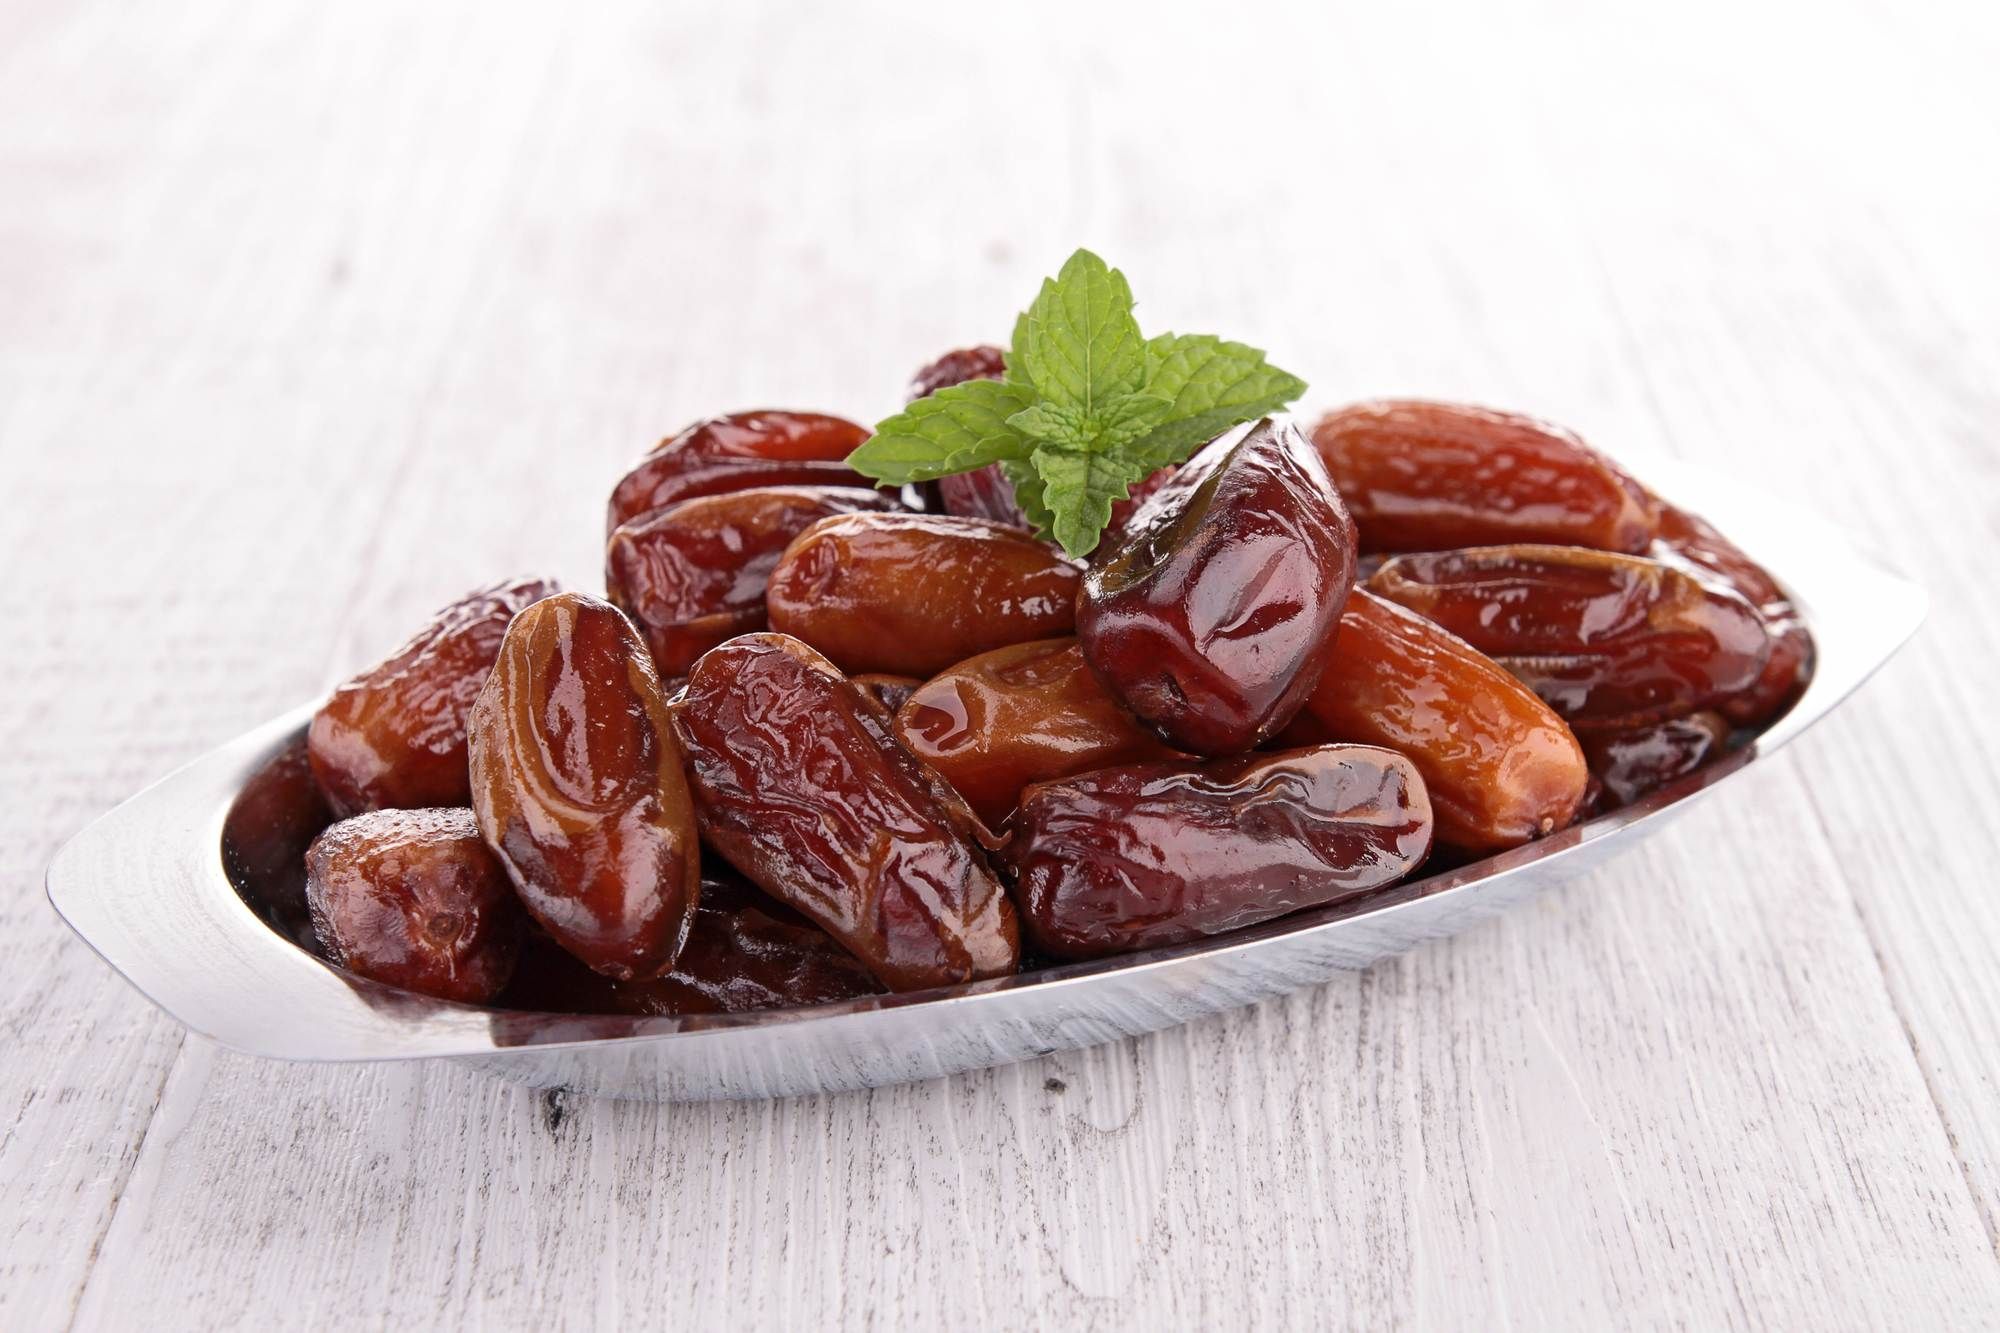 Sainsbury’s recall has made on certain packs of Taste the Difference Medjool Dates as they may be contaminated with the hepatitis A virus.